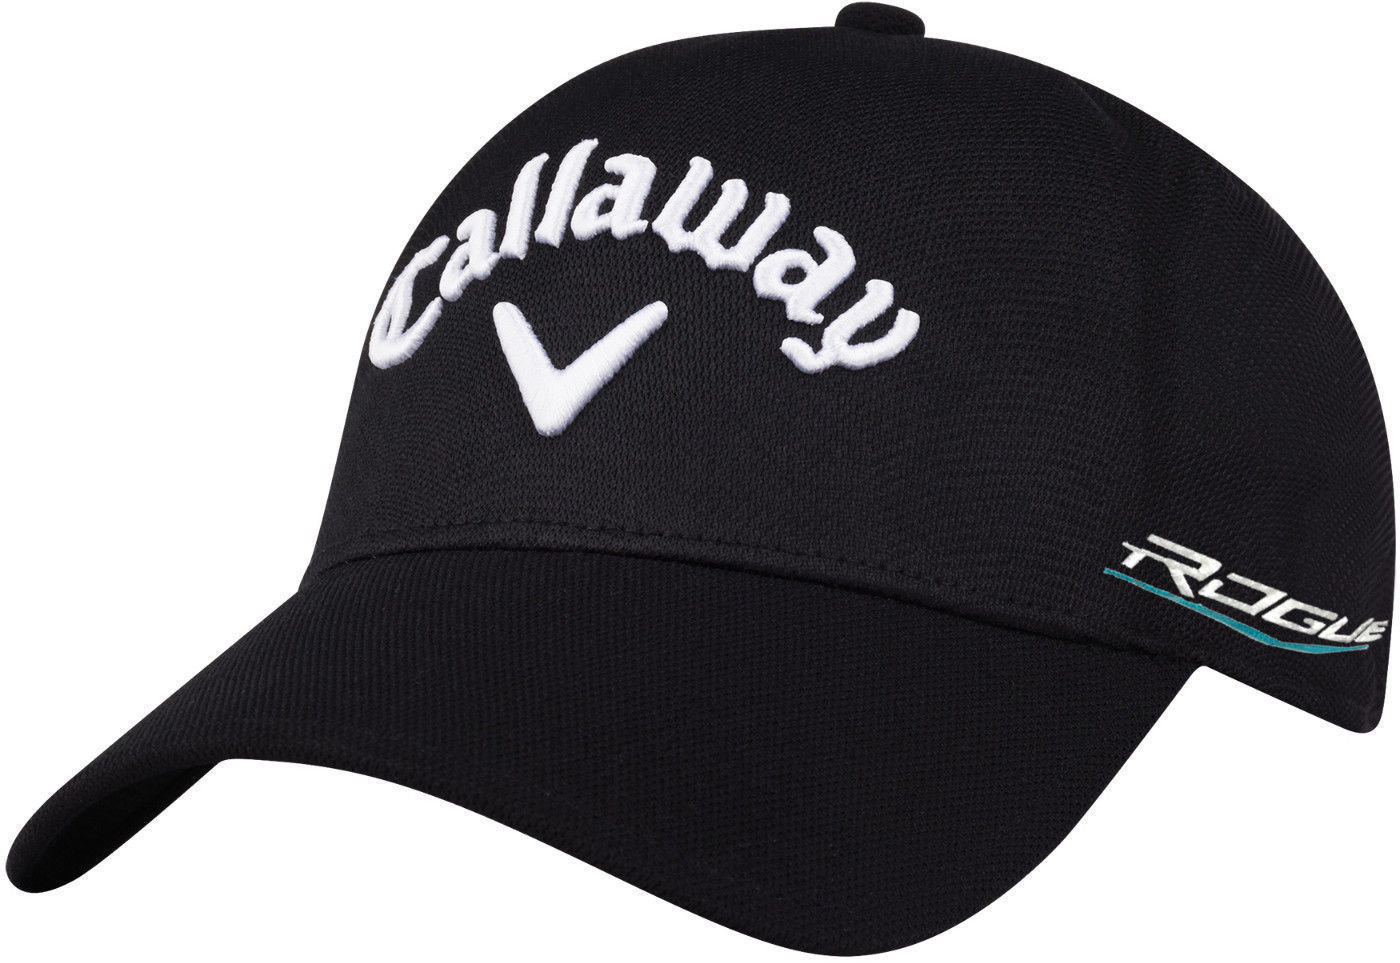 Keps Callaway Tour Authentic Keps